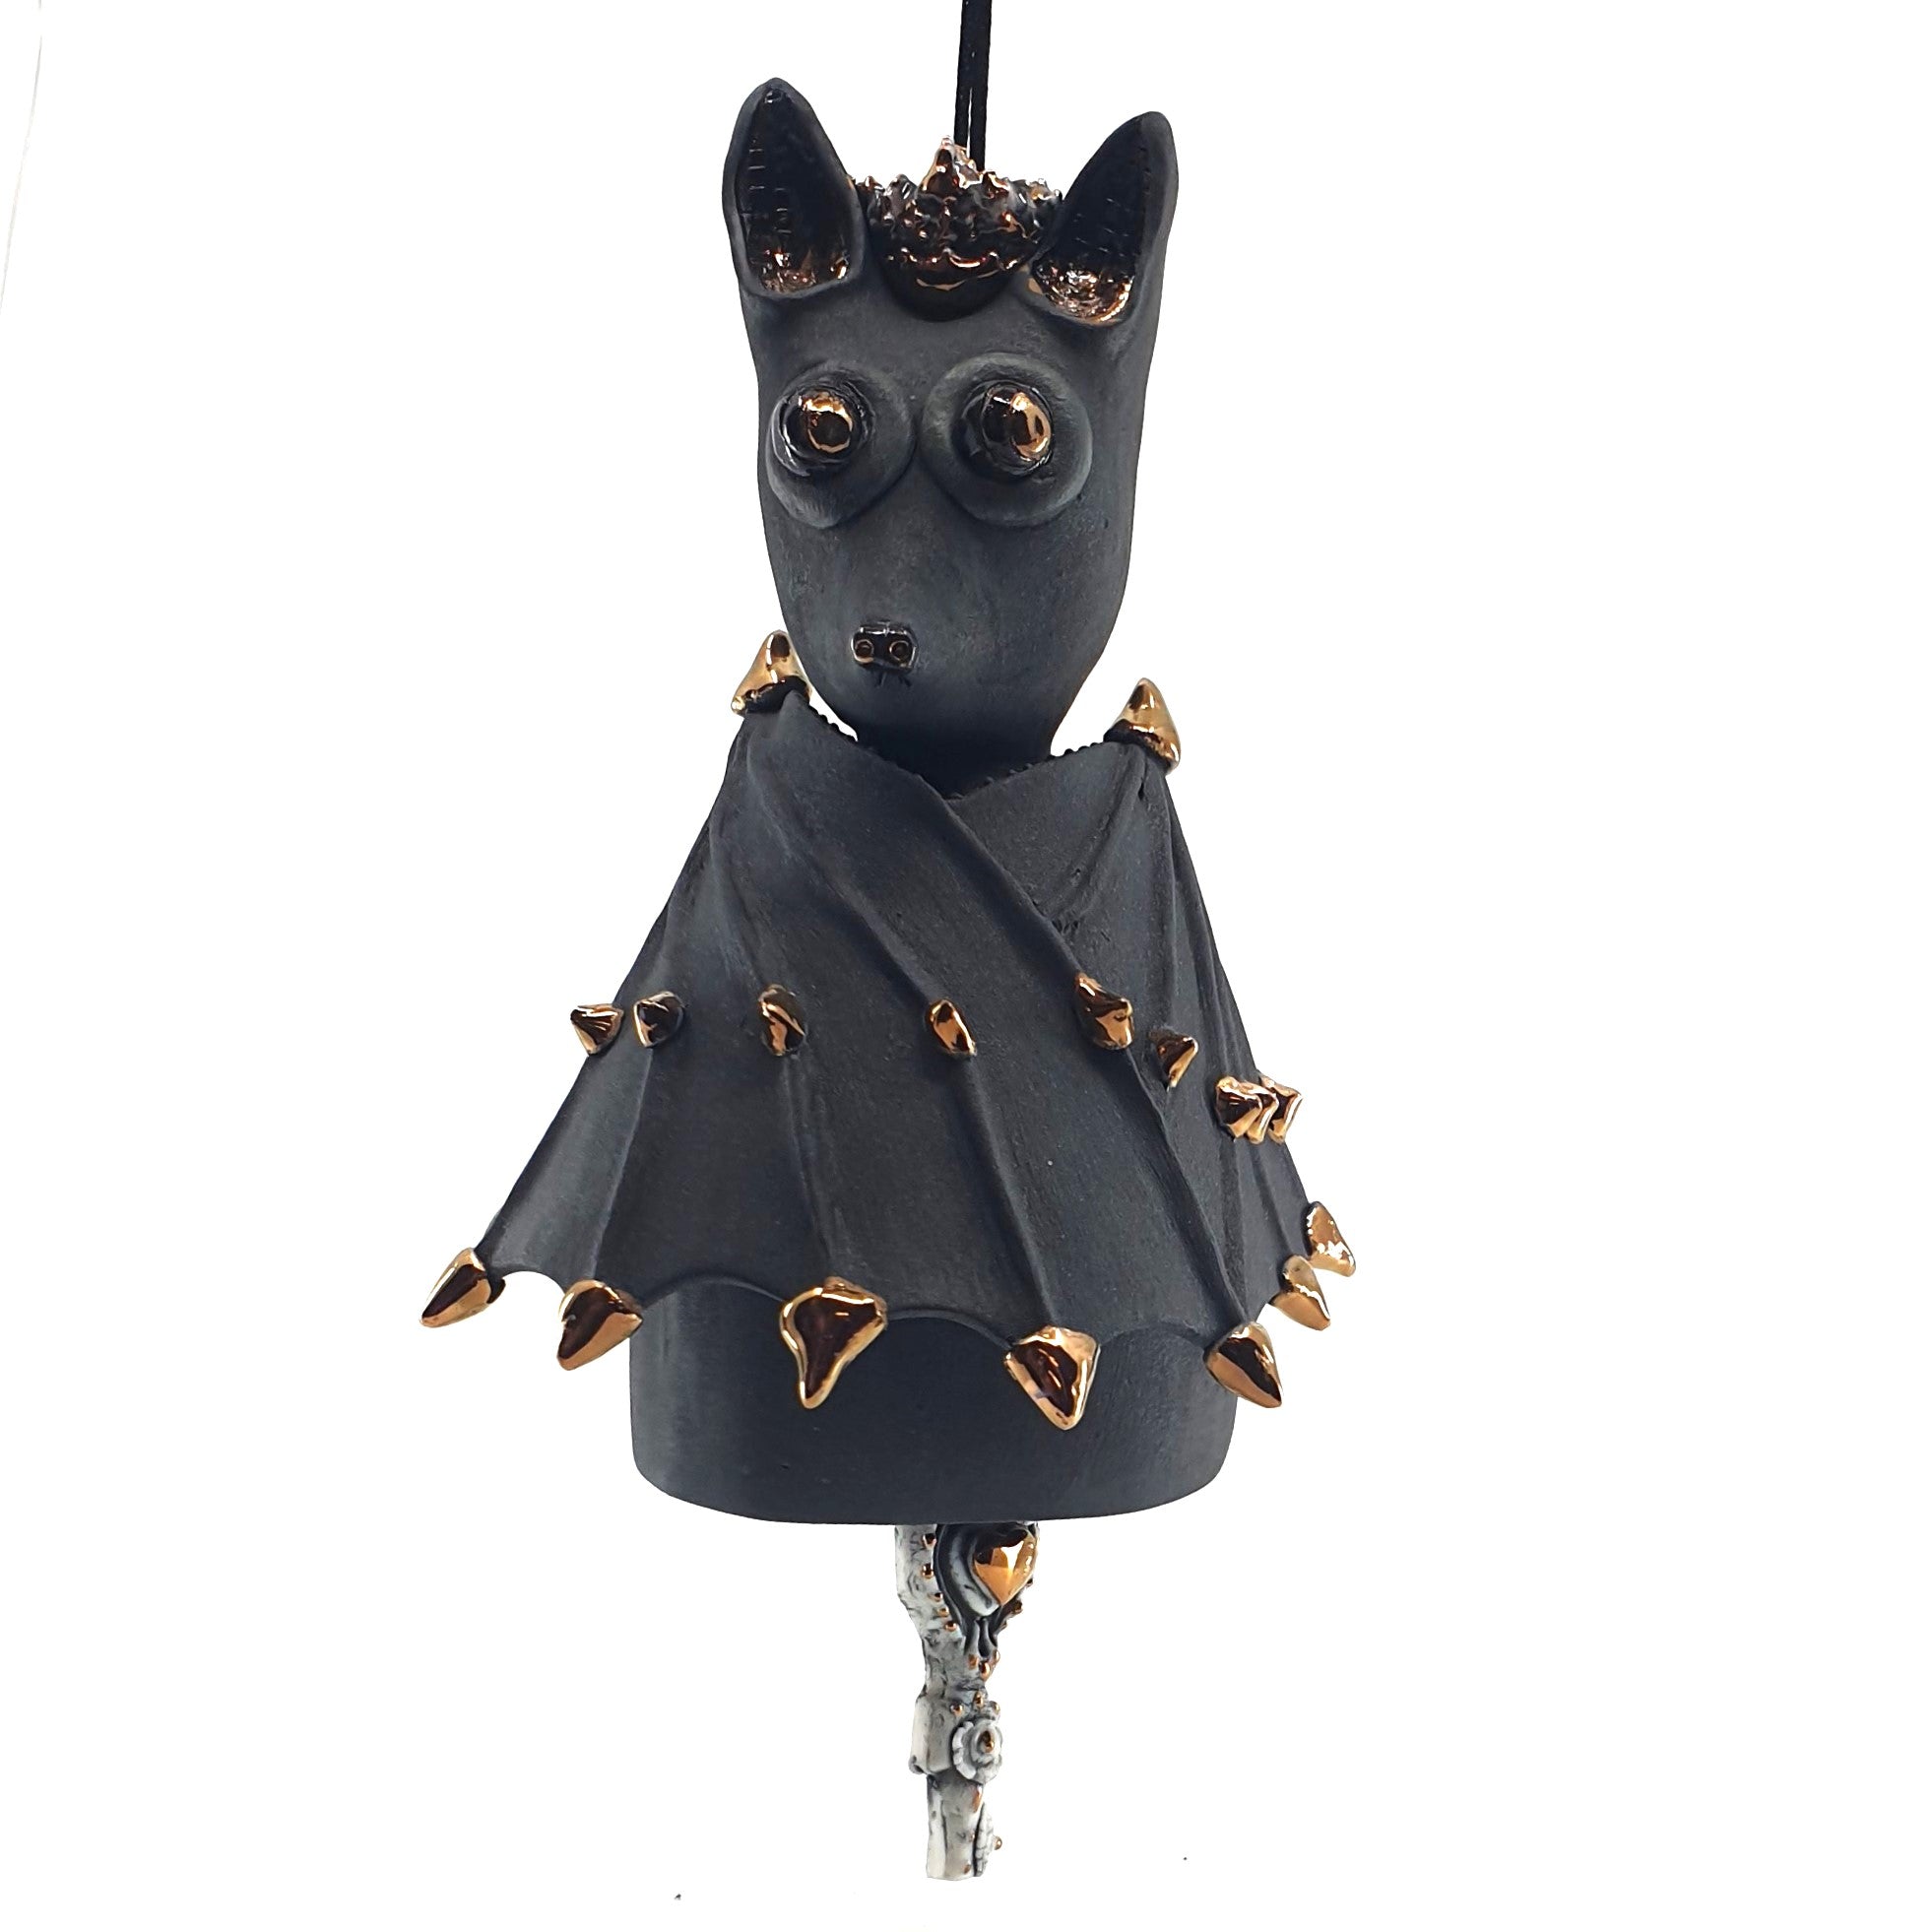 Bat Sculpture (black and copper with spikey coat)